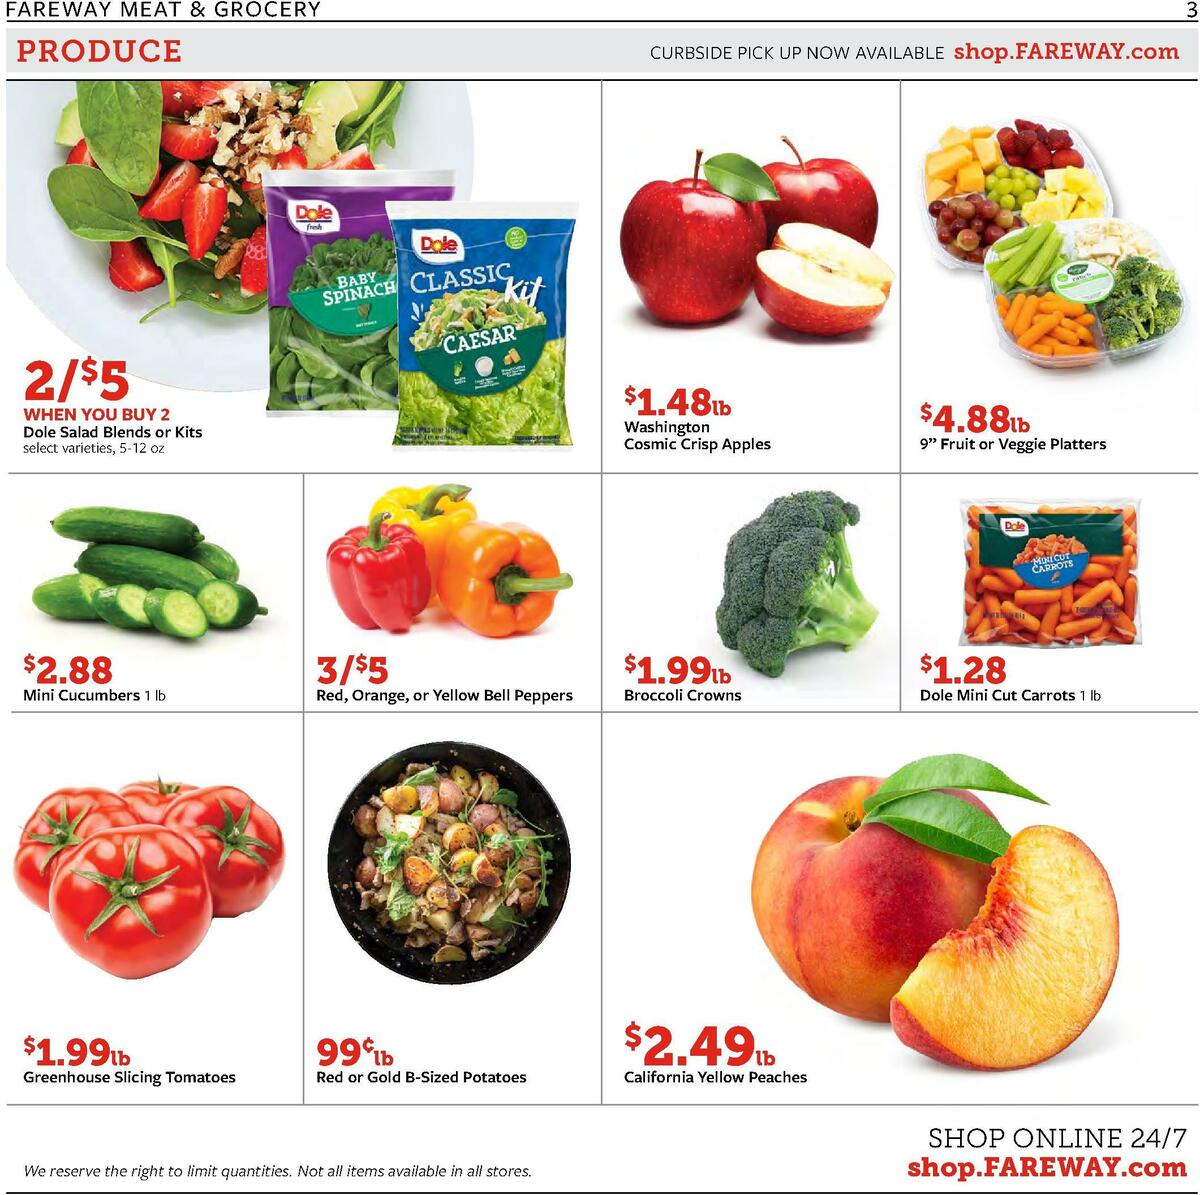 Fareway Weekly Ad from June 19